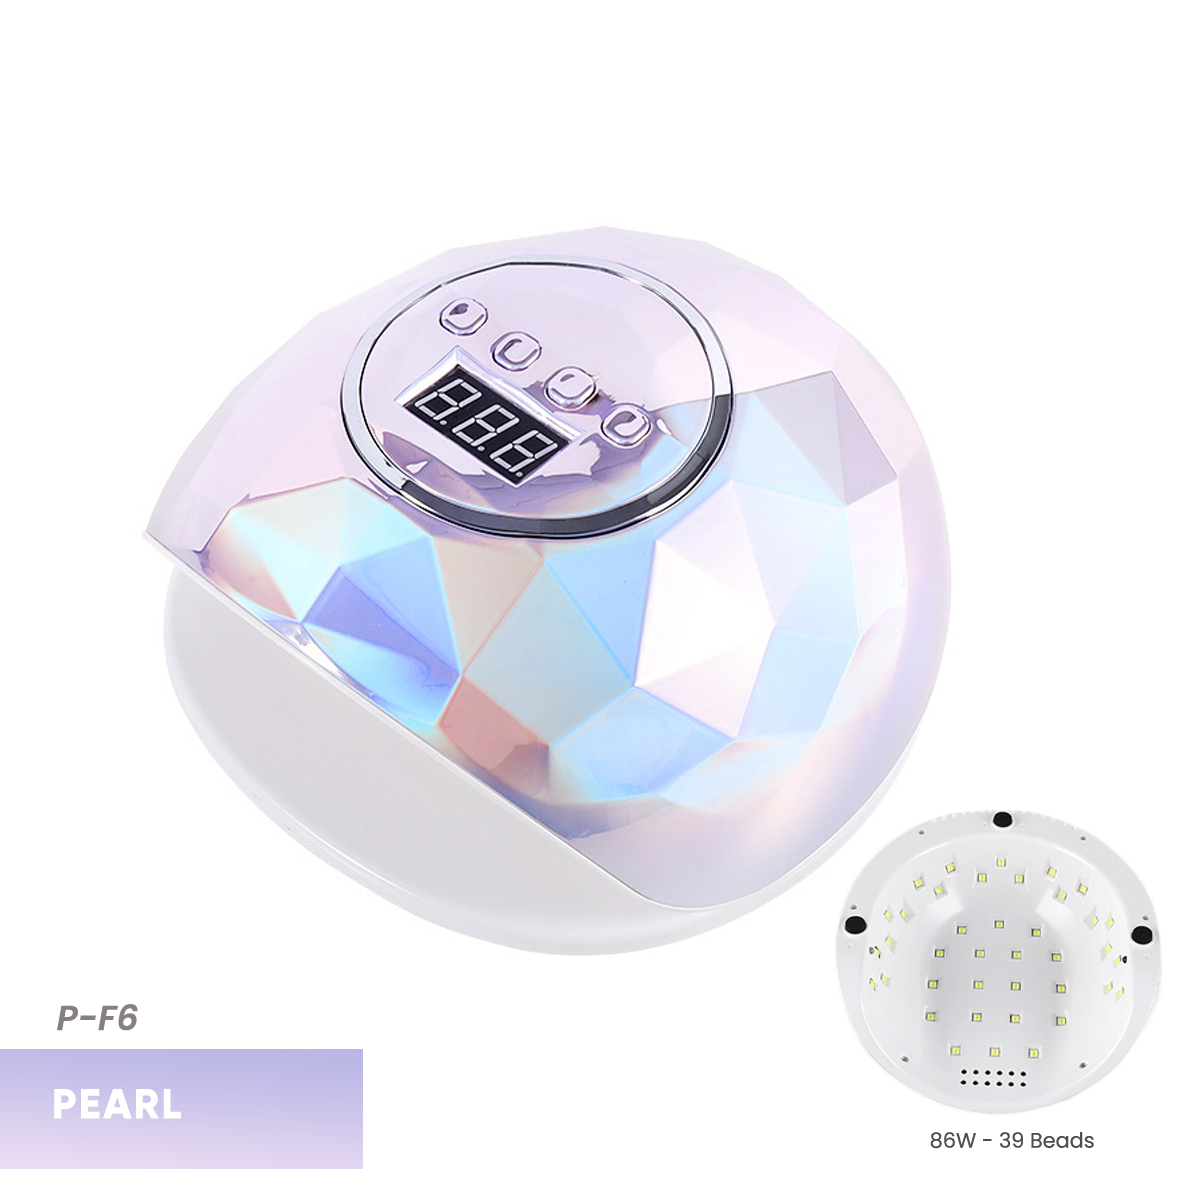 P-F6-Pearl Prismatic 86W UV LED Curing Lamp